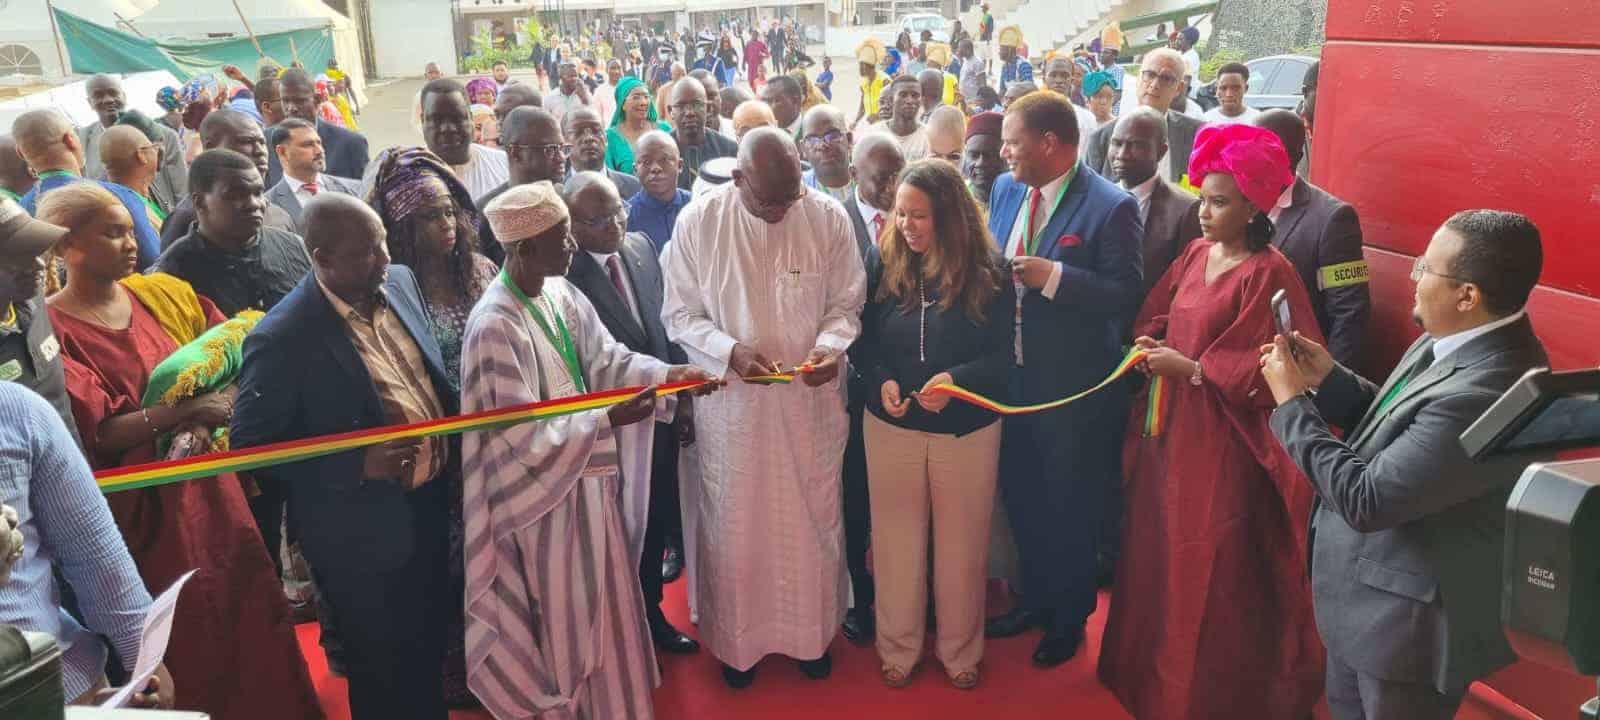 Opening ceremony of the 17th OIC Trade Fair held from 13 to 16 June 2022 in Dakar Republic of Senegal